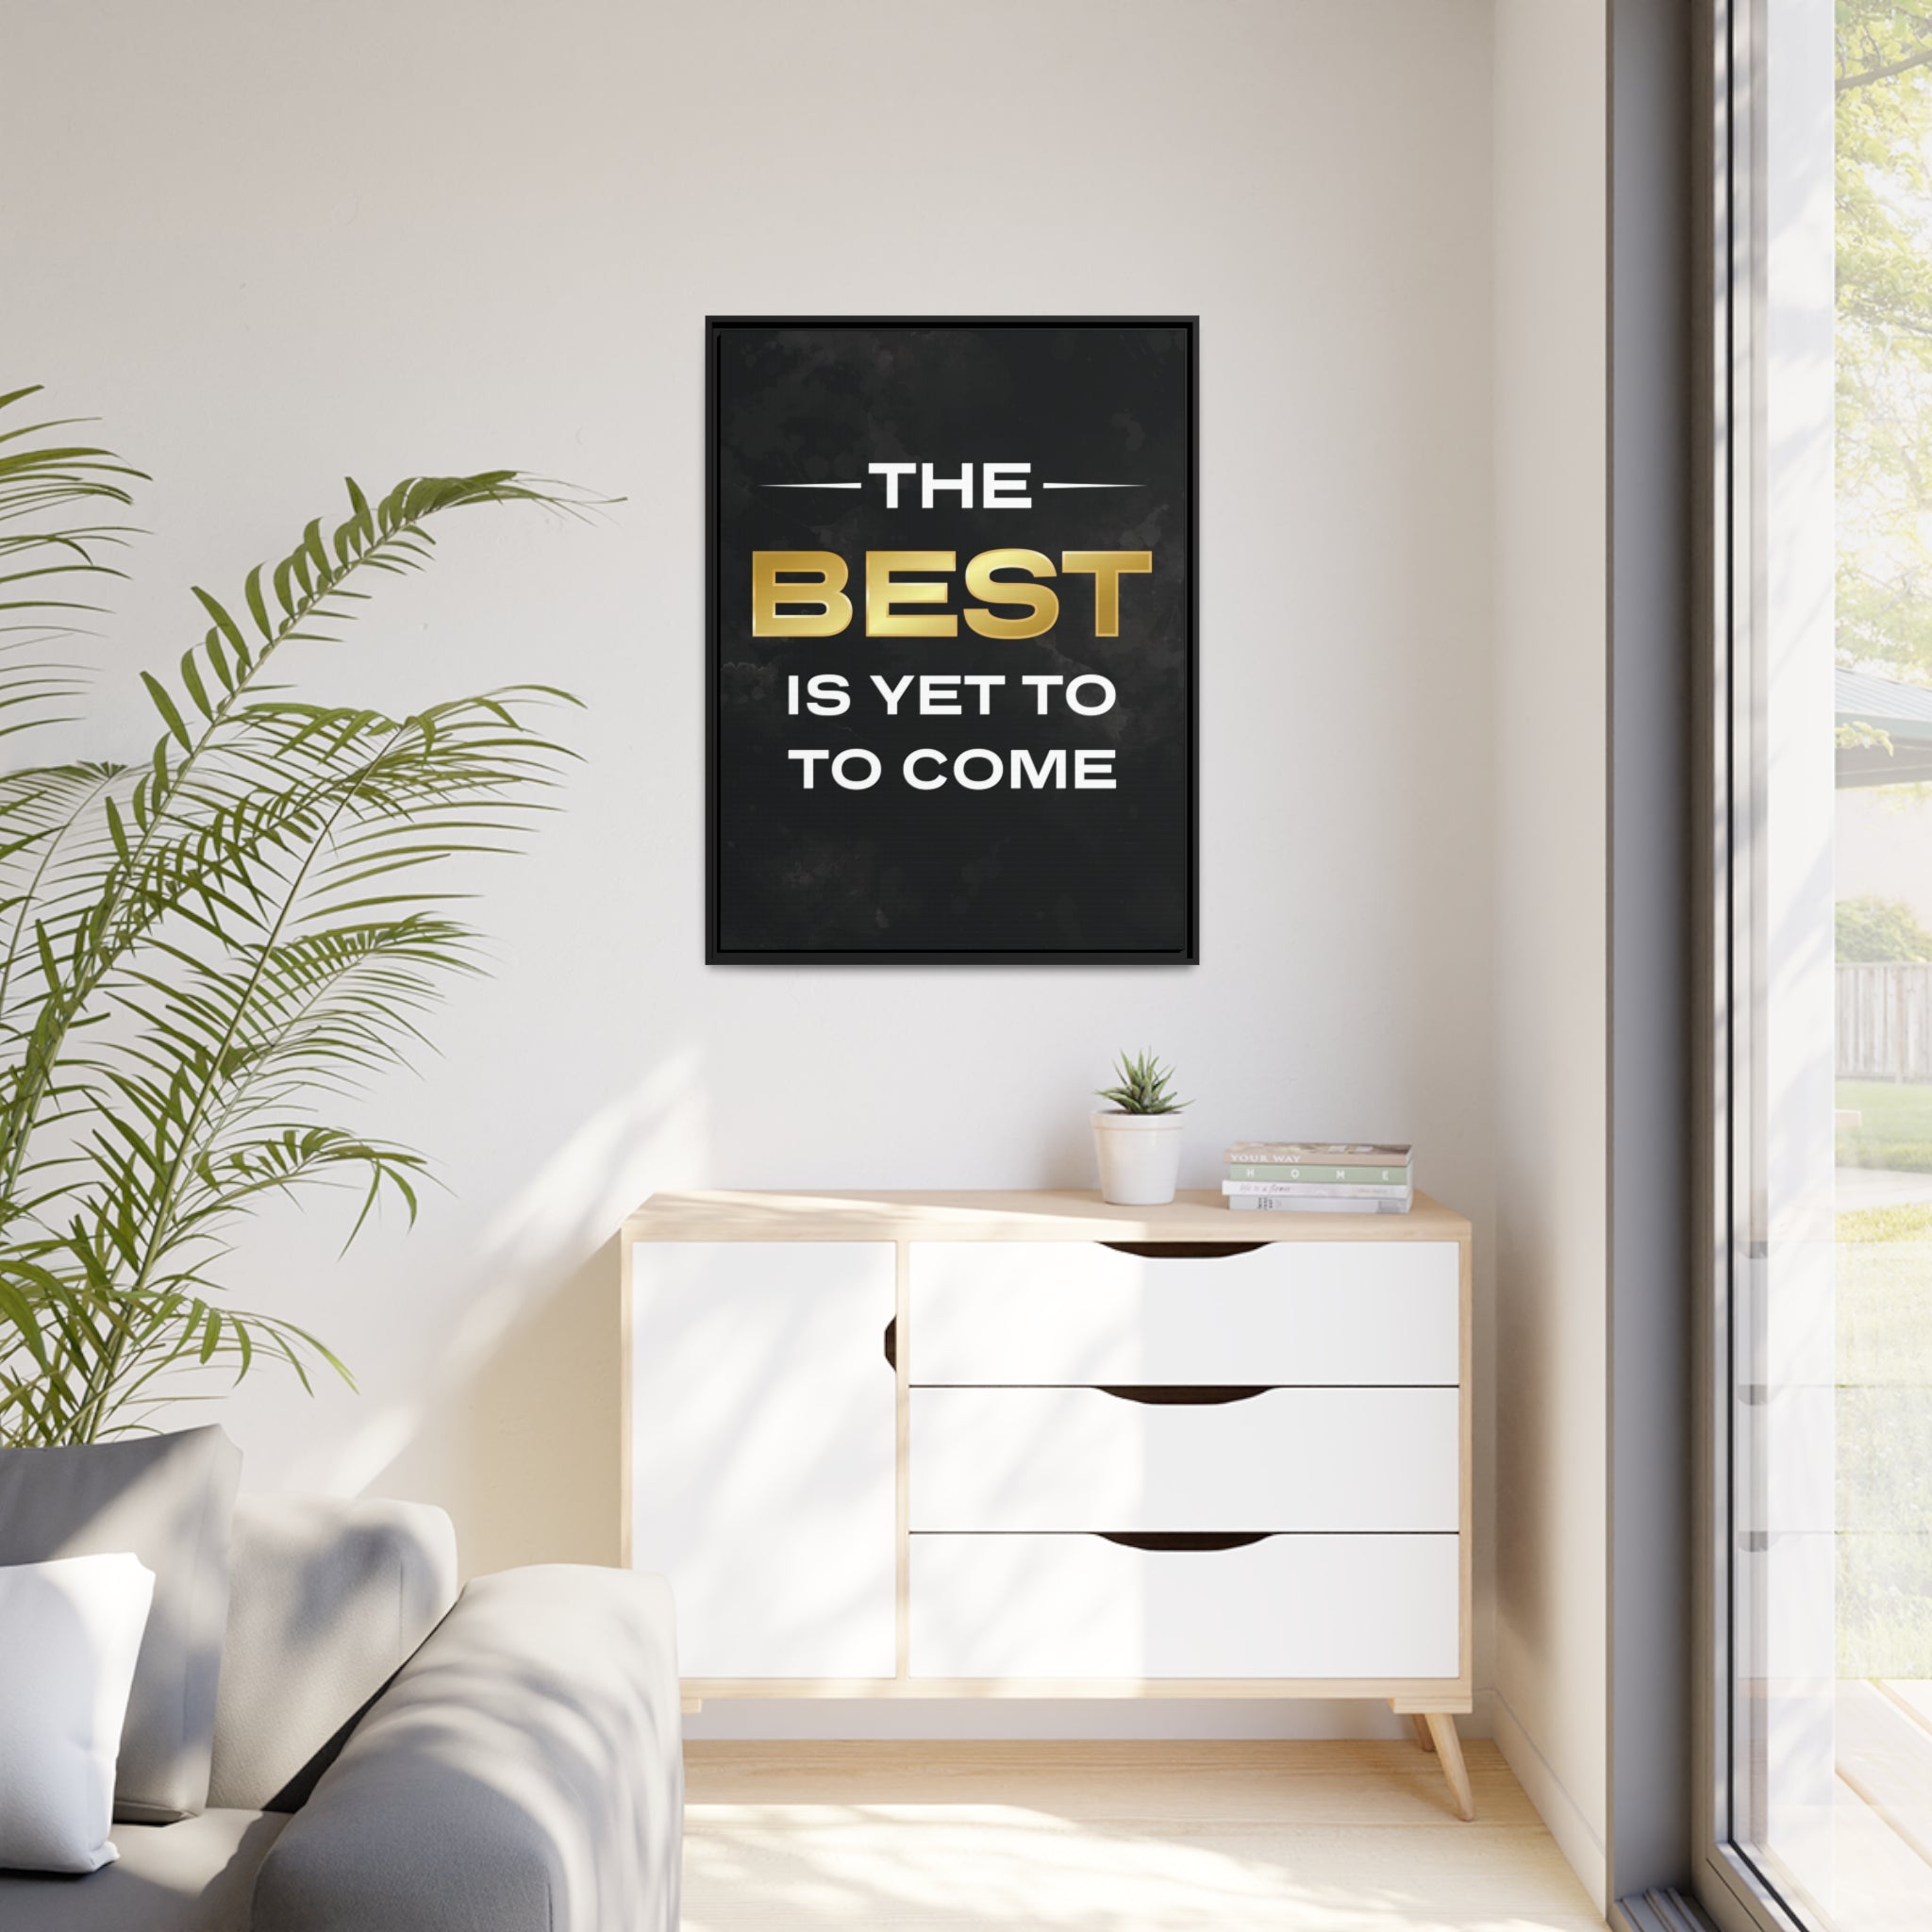 The Best Is Yet To Come Wall Art additional image 5